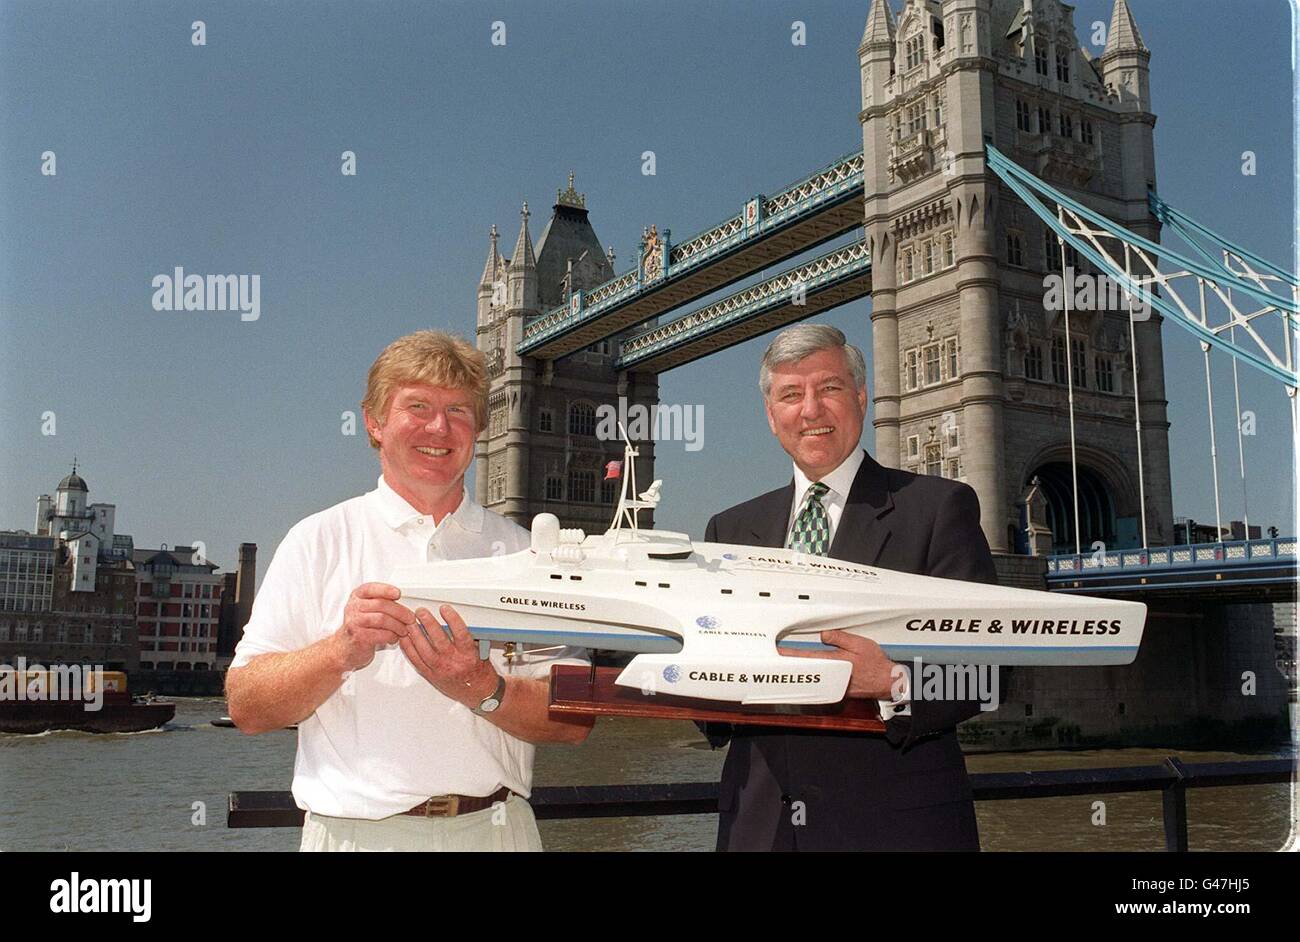 Skipper and leader of the Cable & Wireless Adventure Jock Wishart (left) and Cable & Wireless Chief Executive Richard H. Brown hold a model of the Cable & Wireless, the 115-foot multi-hull powered vessel which will attempt to go around the world in 80 days in 1998. Mr Wishart who will captain the Cable and Wireless on its pioneering 26,000-mile worldwide journey is offering 16 people to join his professional crew of four. Photo by Sam Pearce/PA. Watch for PA Story. Stock Photo